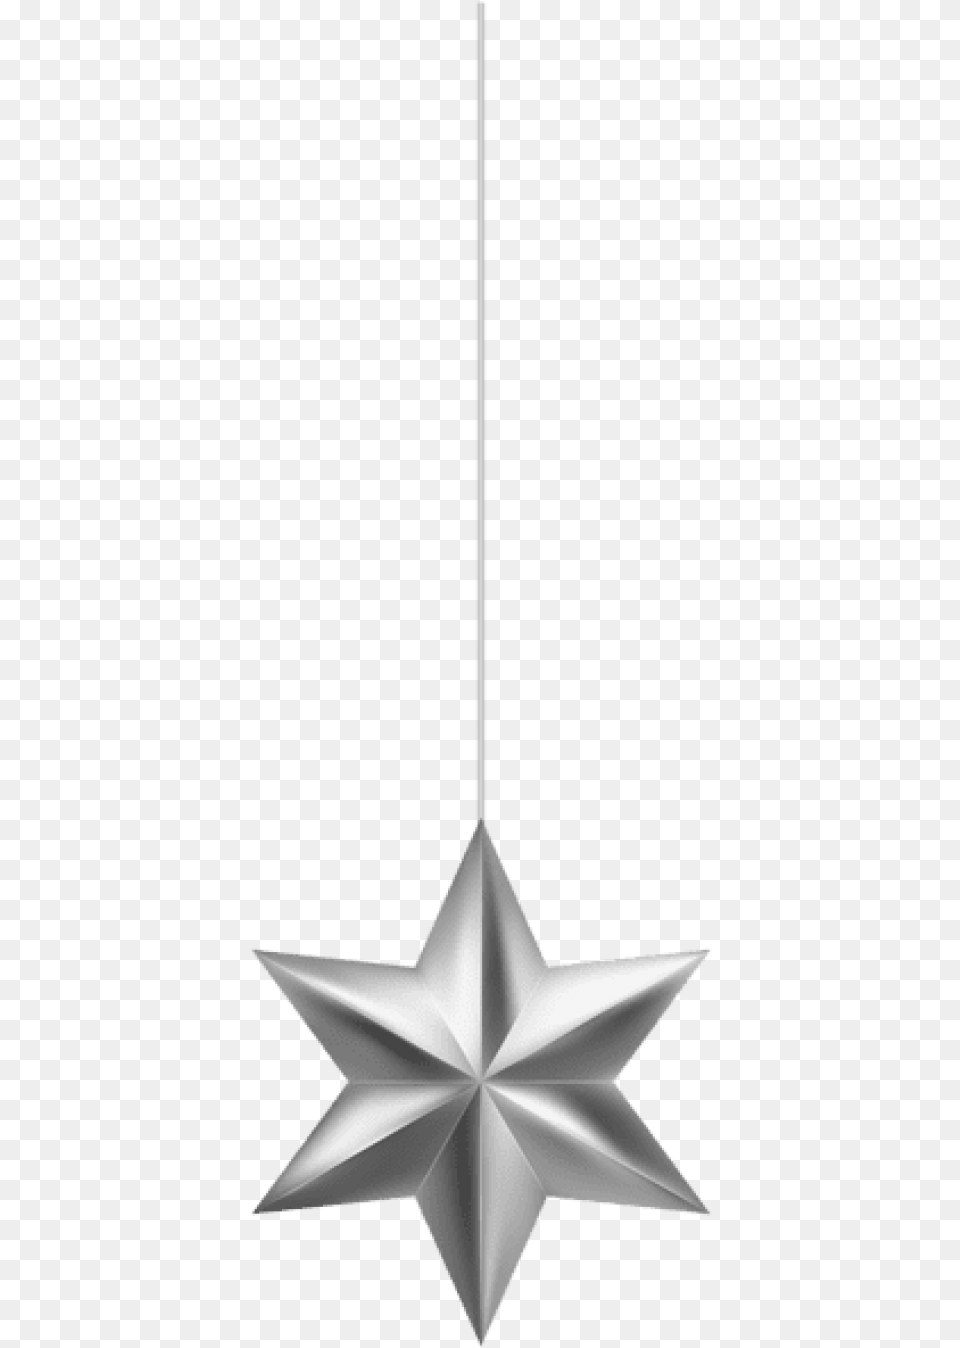 Silver Christmas Star Ornament Images Origami, Star Symbol, Symbol Free Png